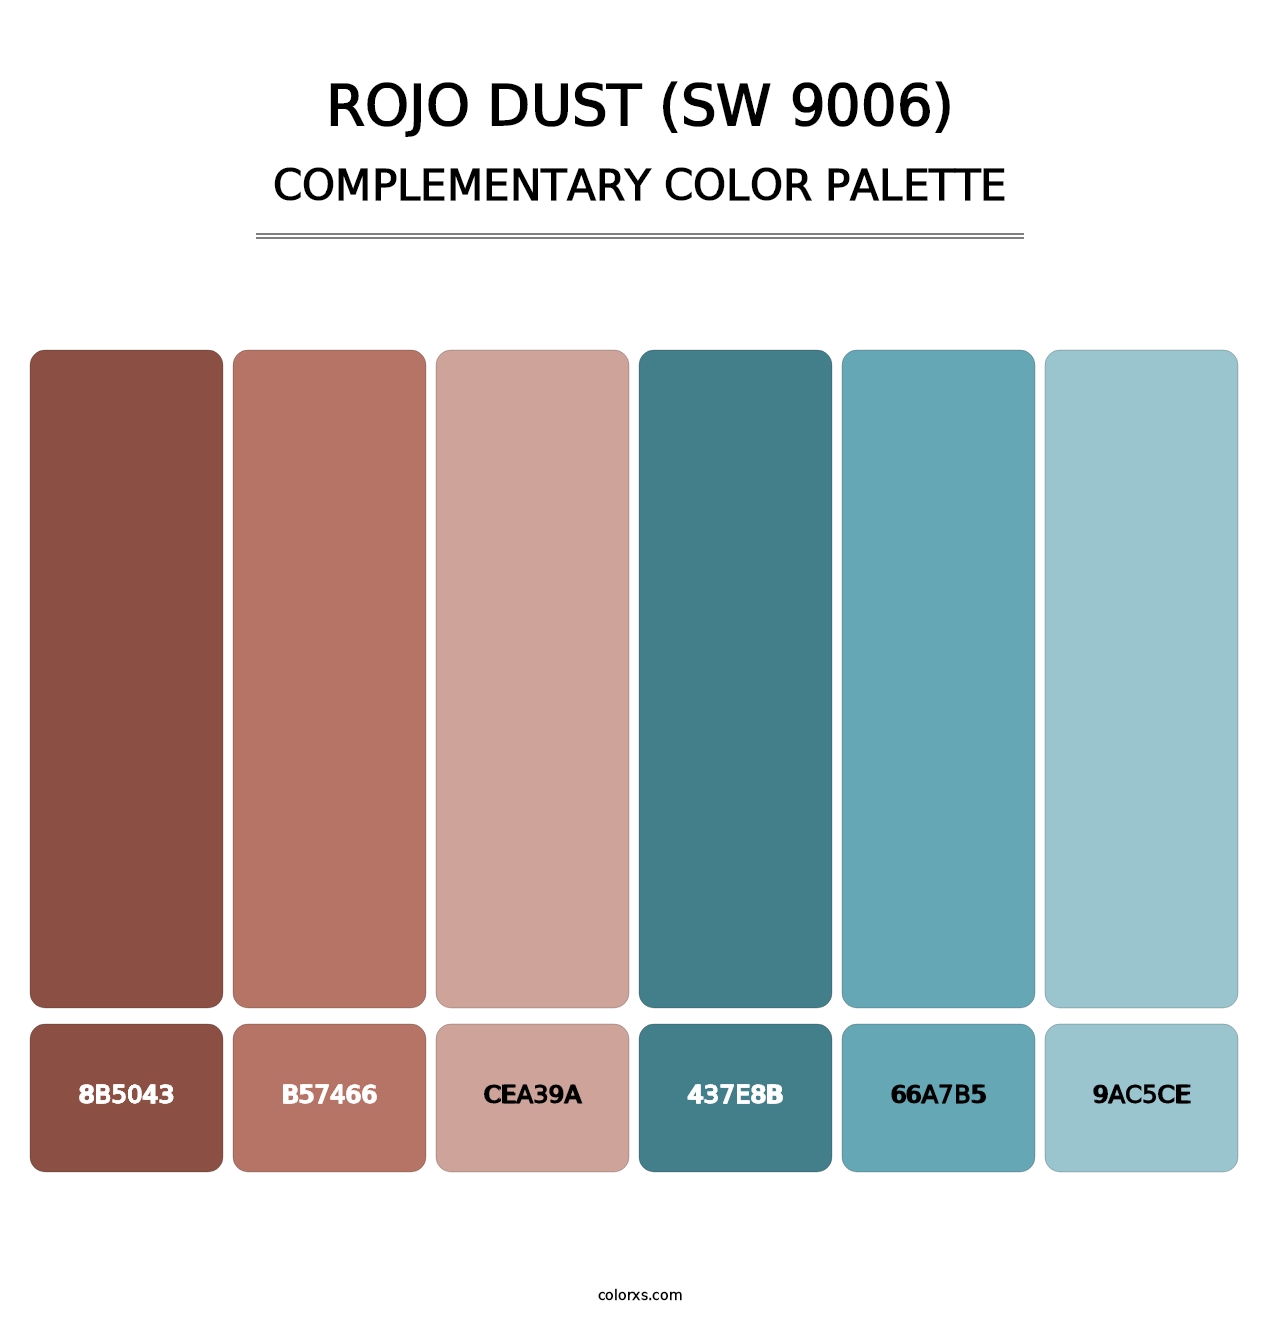 Rojo Dust (SW 9006) - Complementary Color Palette